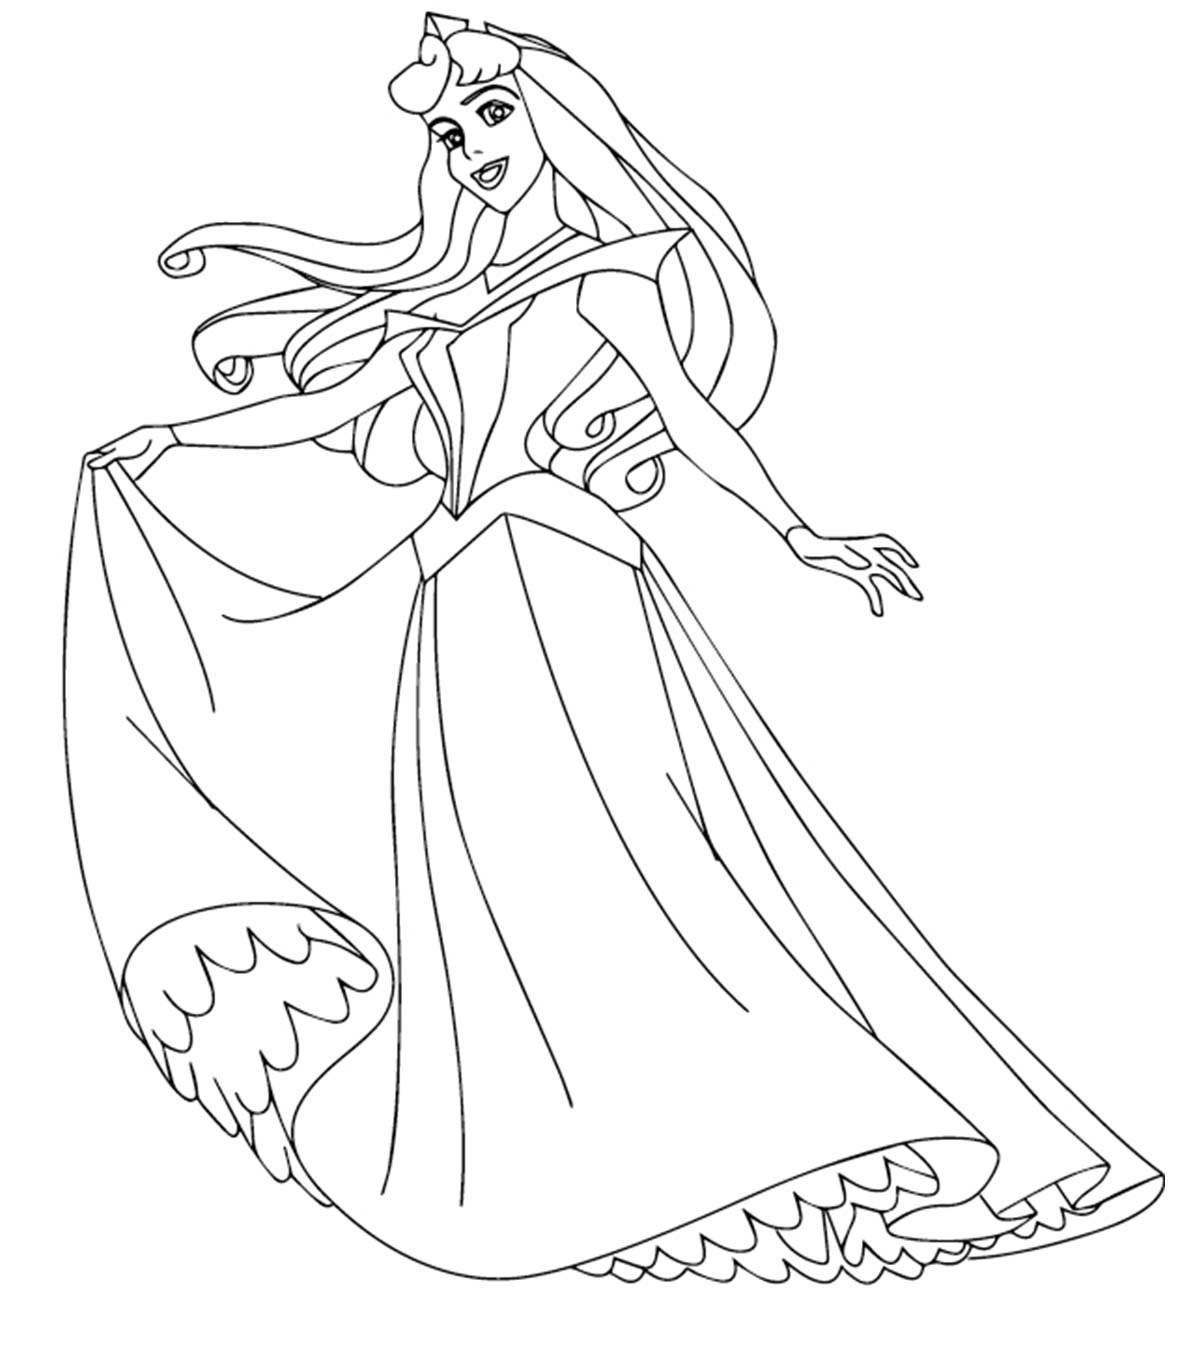 Top 21 Disney Princess Coloring Pages For Your Little Girl ...